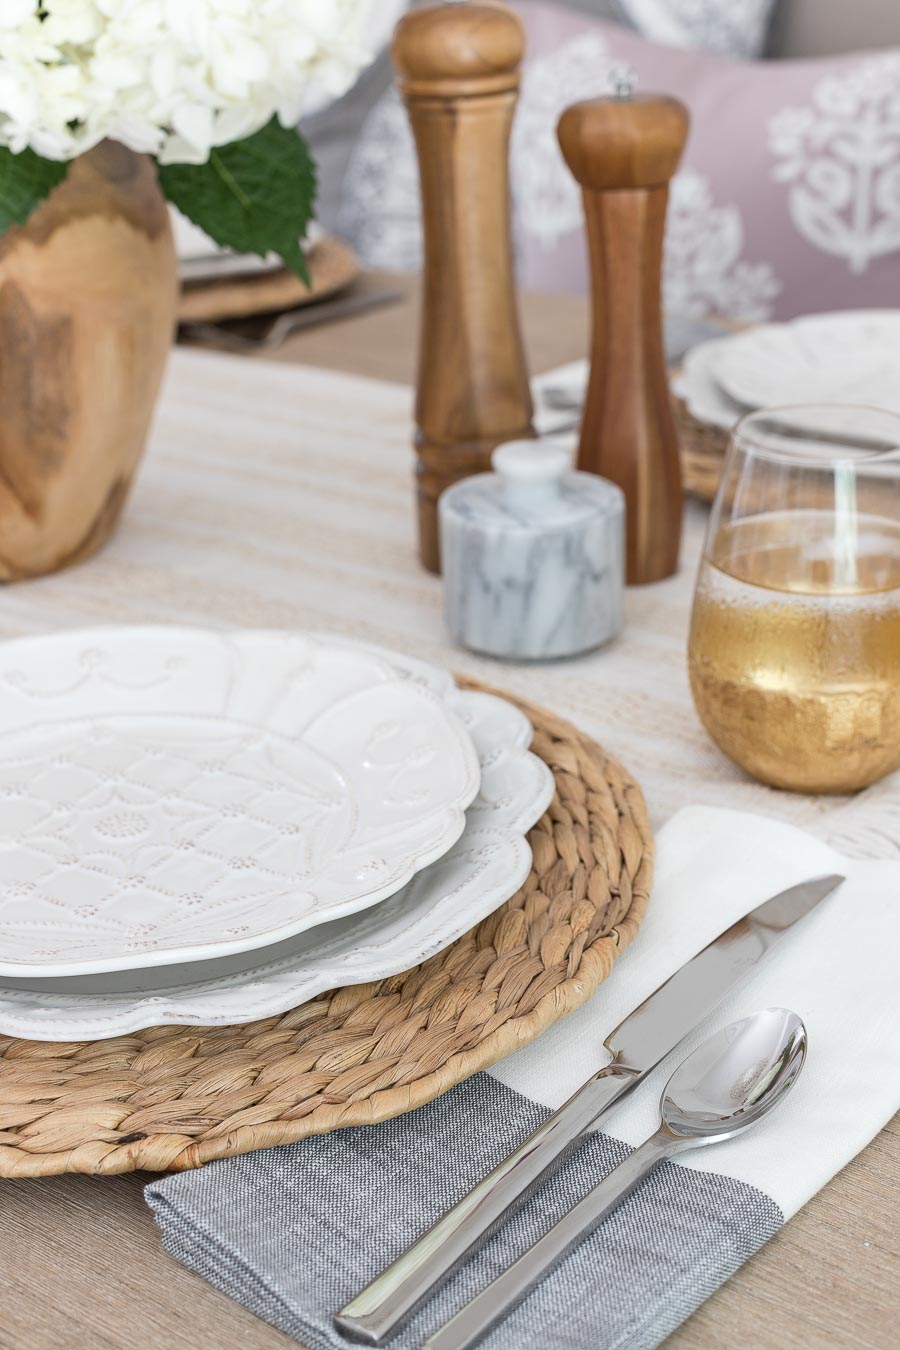 Beautiful, simple table setting with woven chargers and black stripe napkins